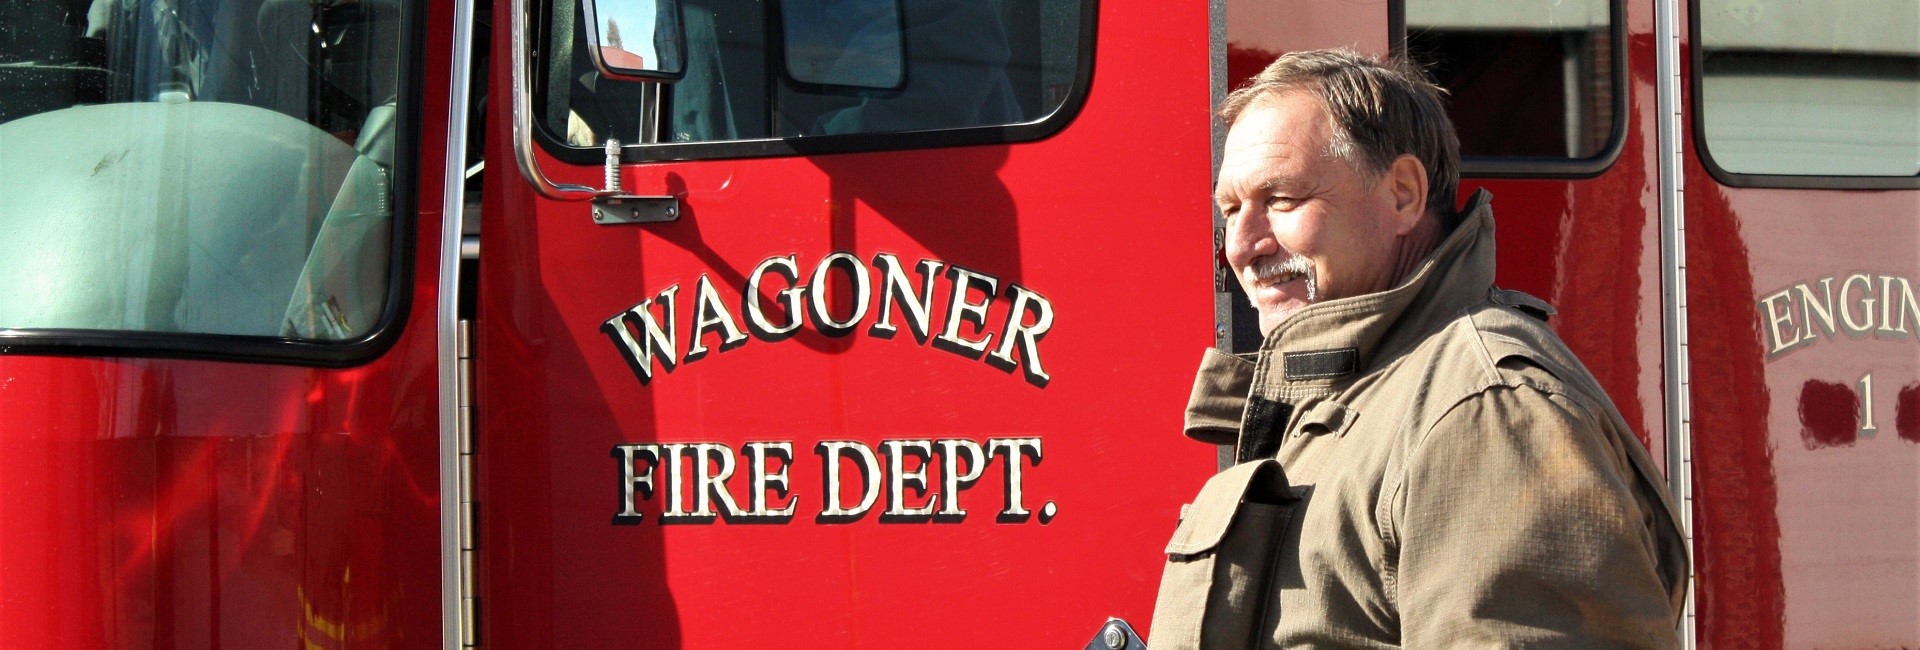 City of Wagoner > Departments > Fire Department > Safety and Prevention